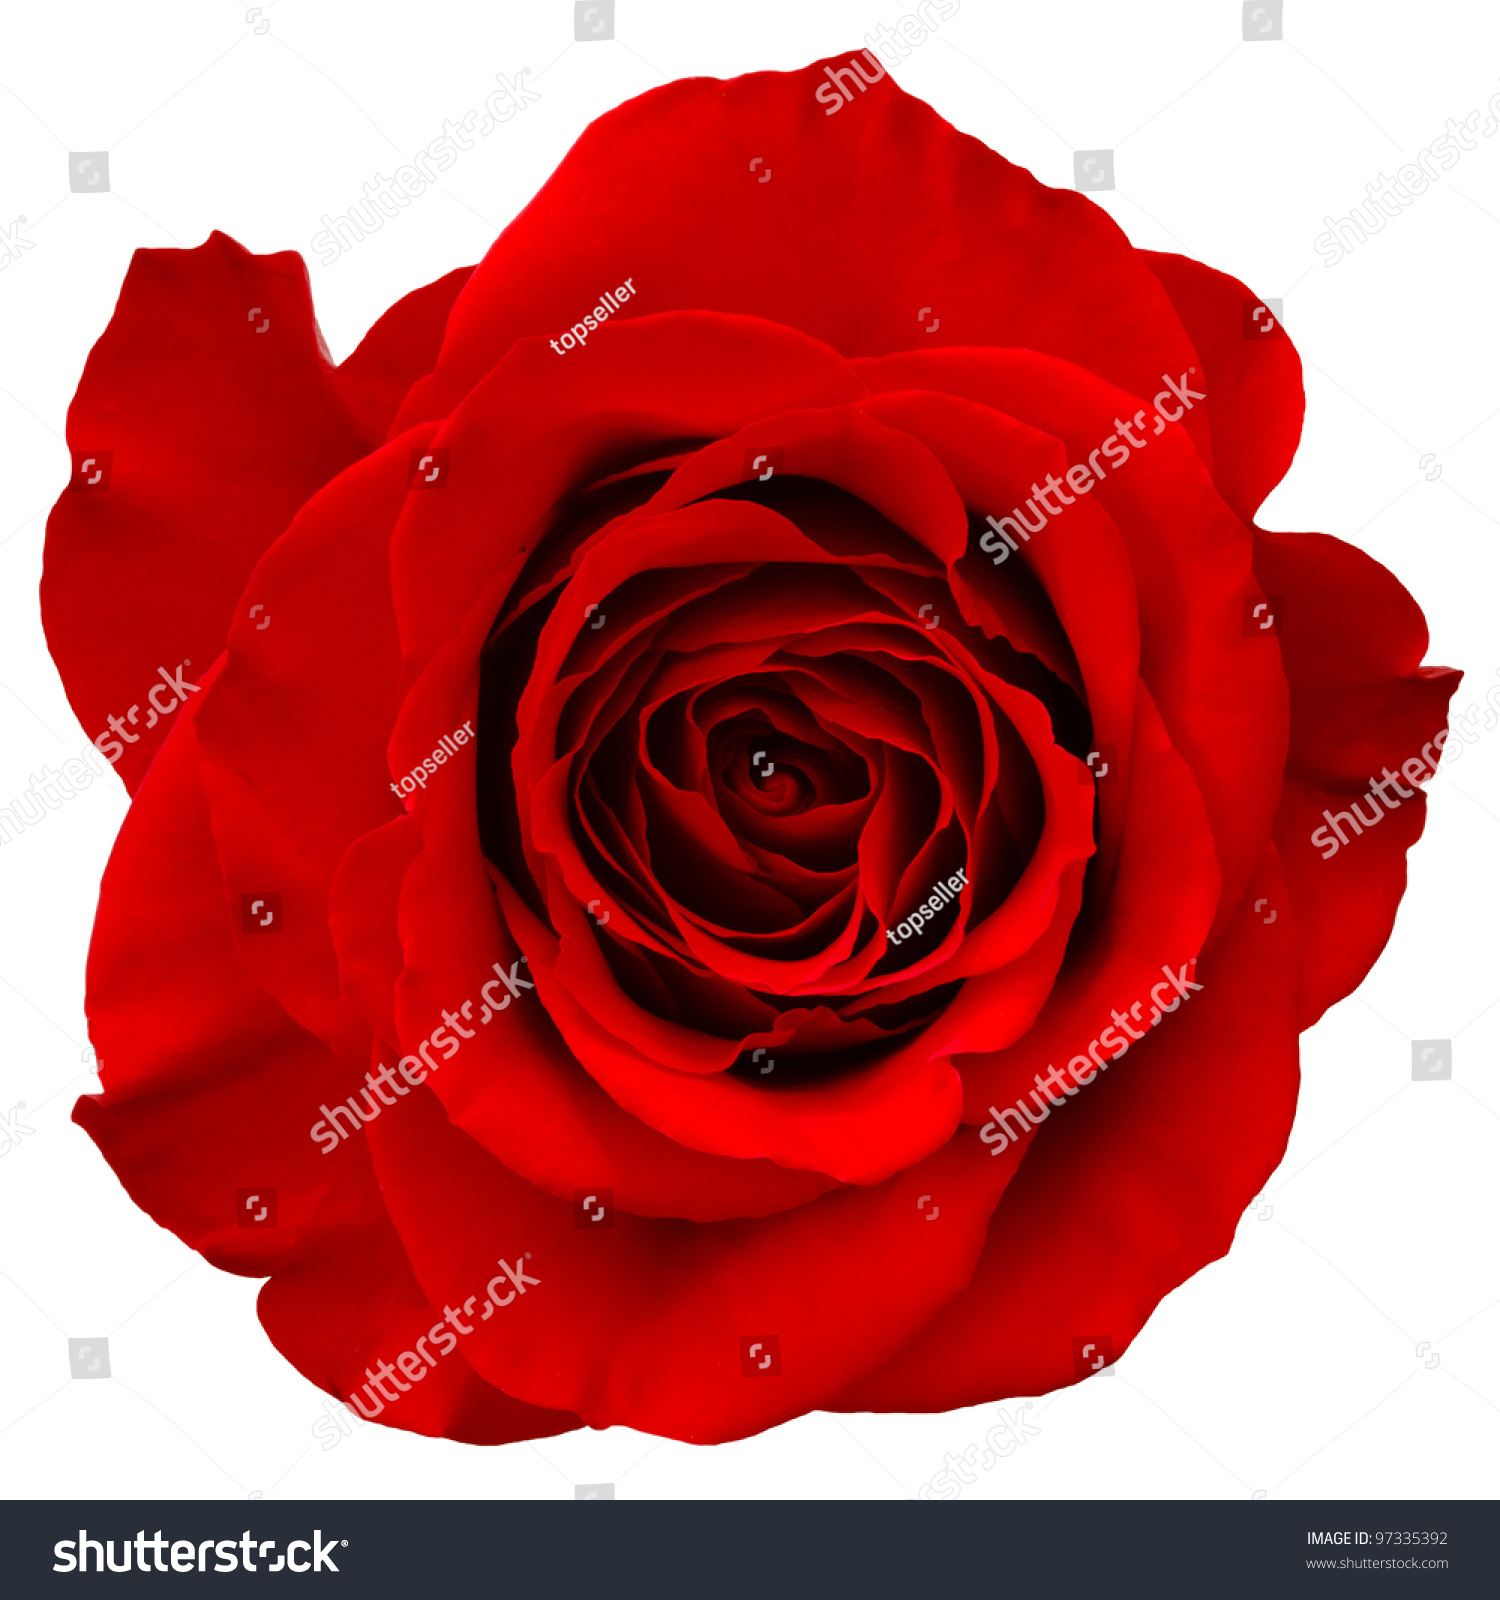 red rose isolated on white background #97335392